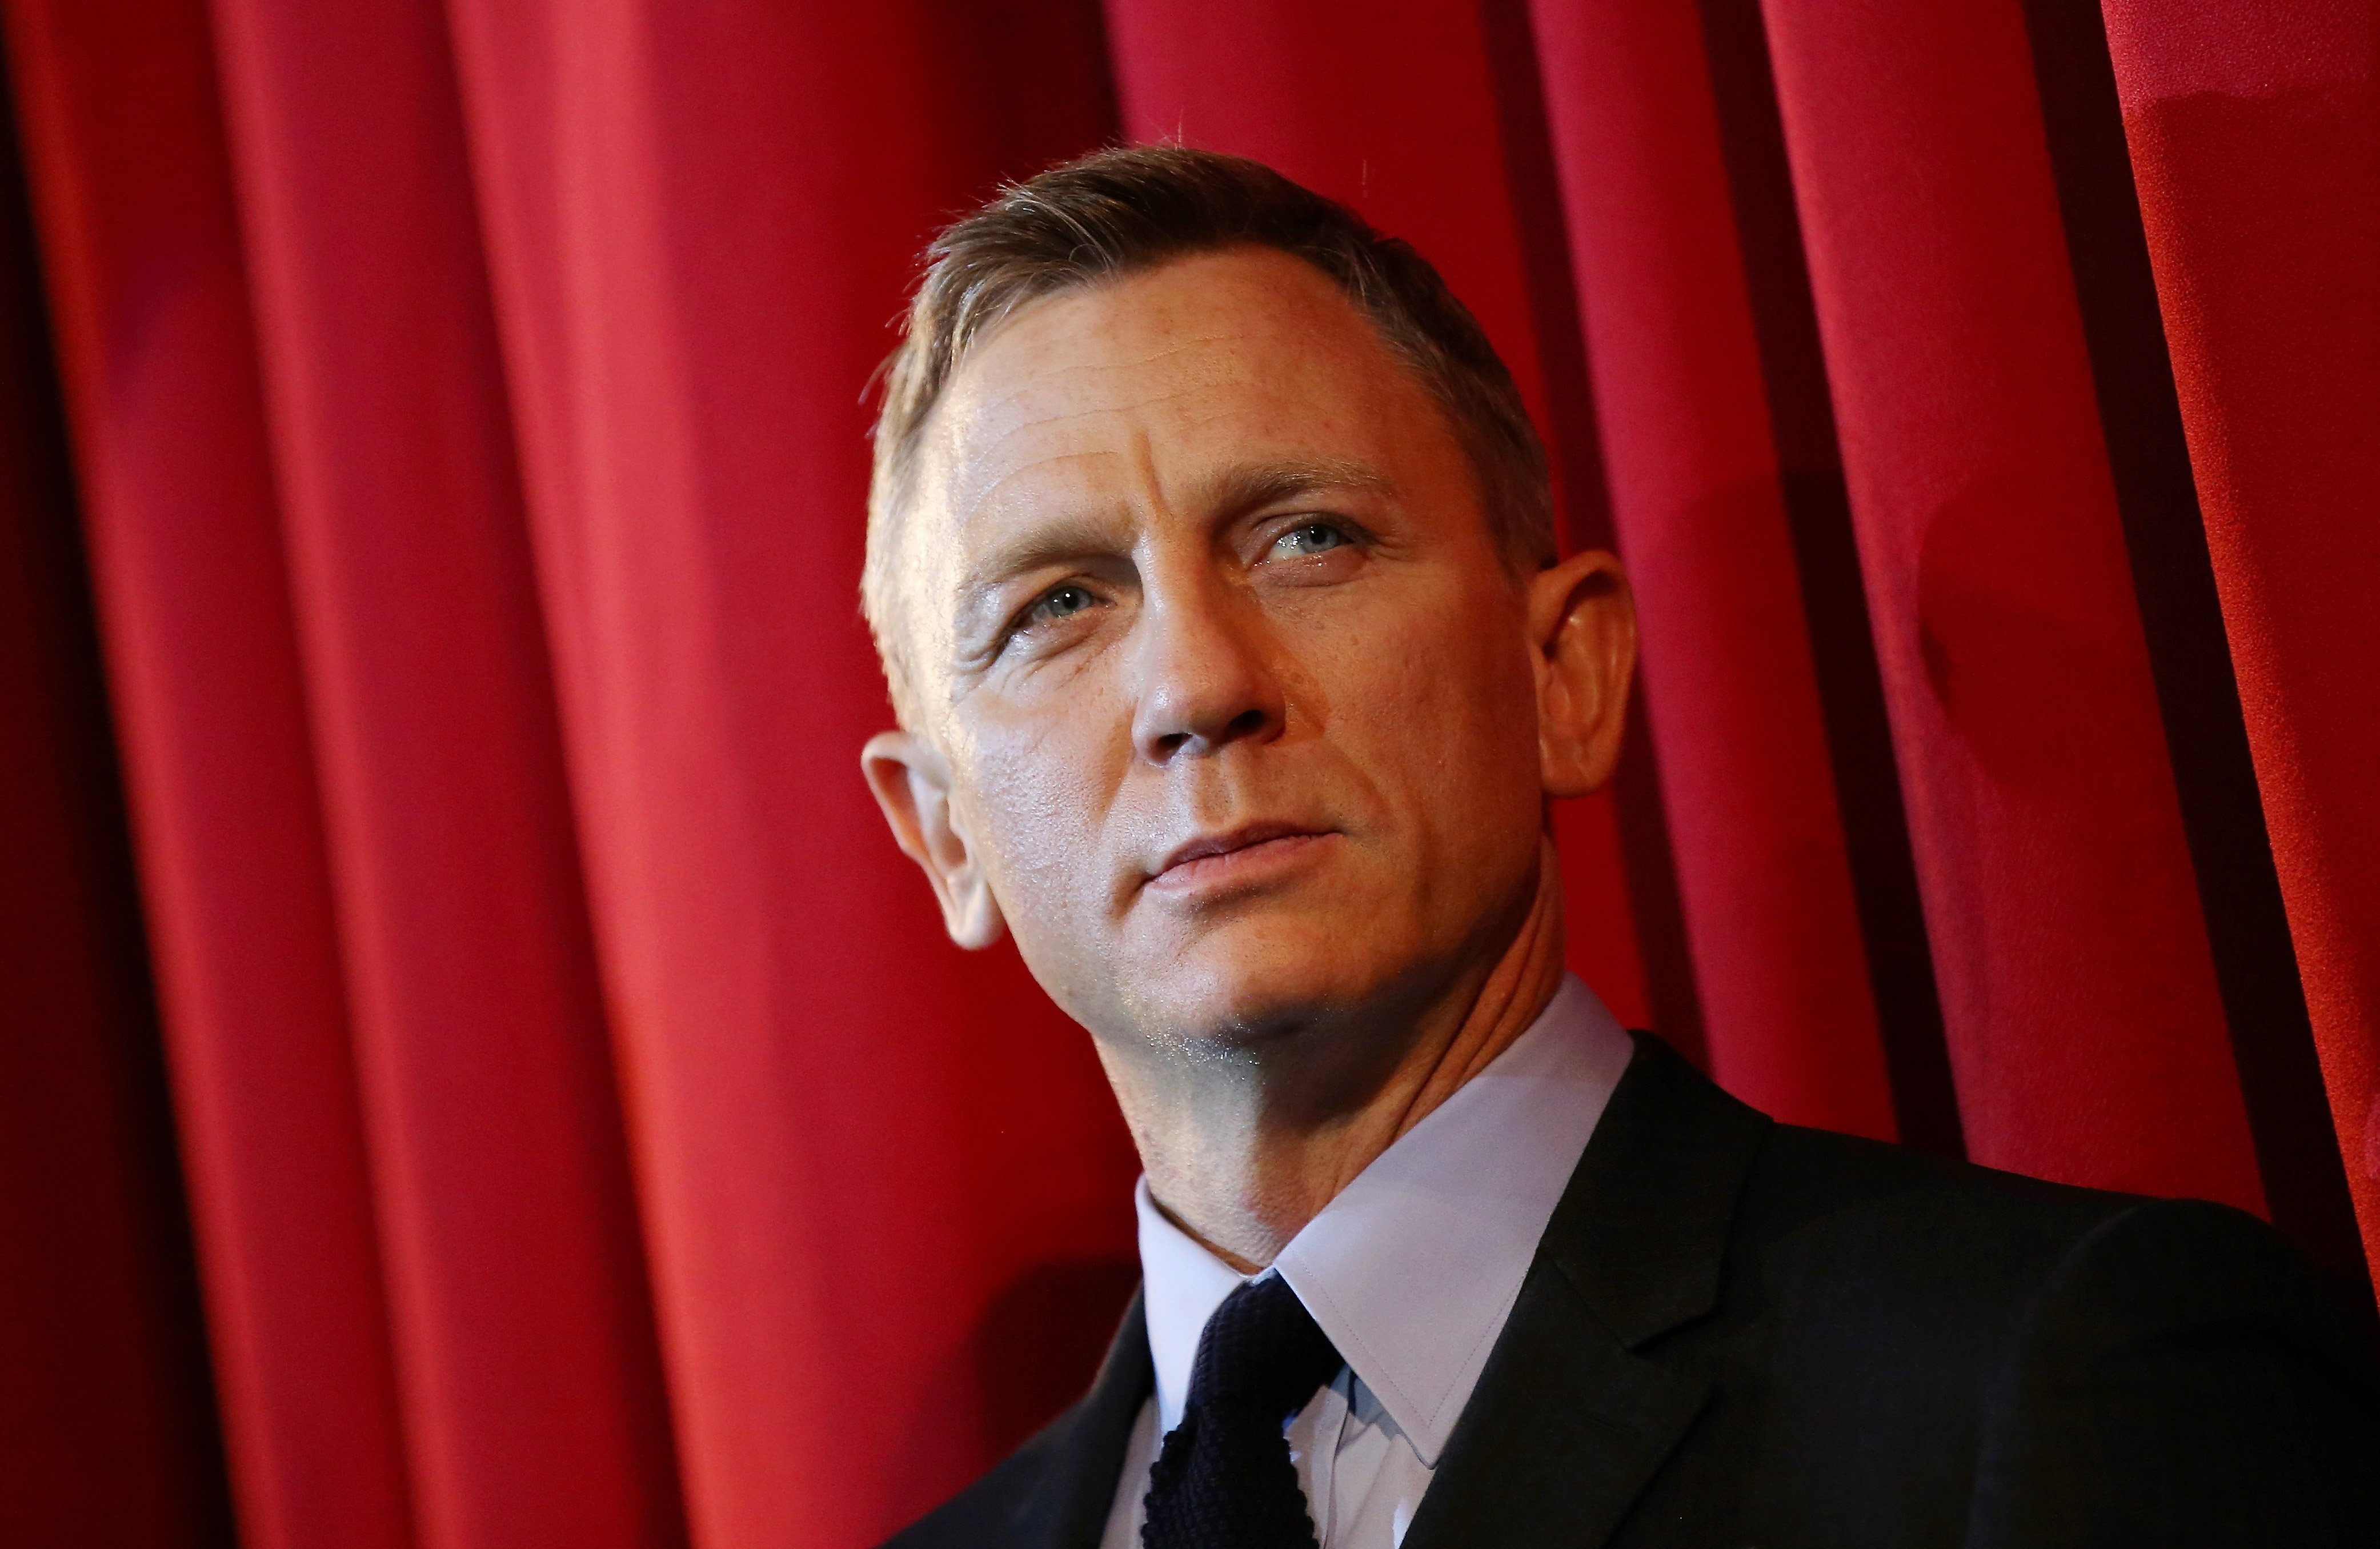 Daniel Craig, star of No Time to Die, poses for James Bond premiere